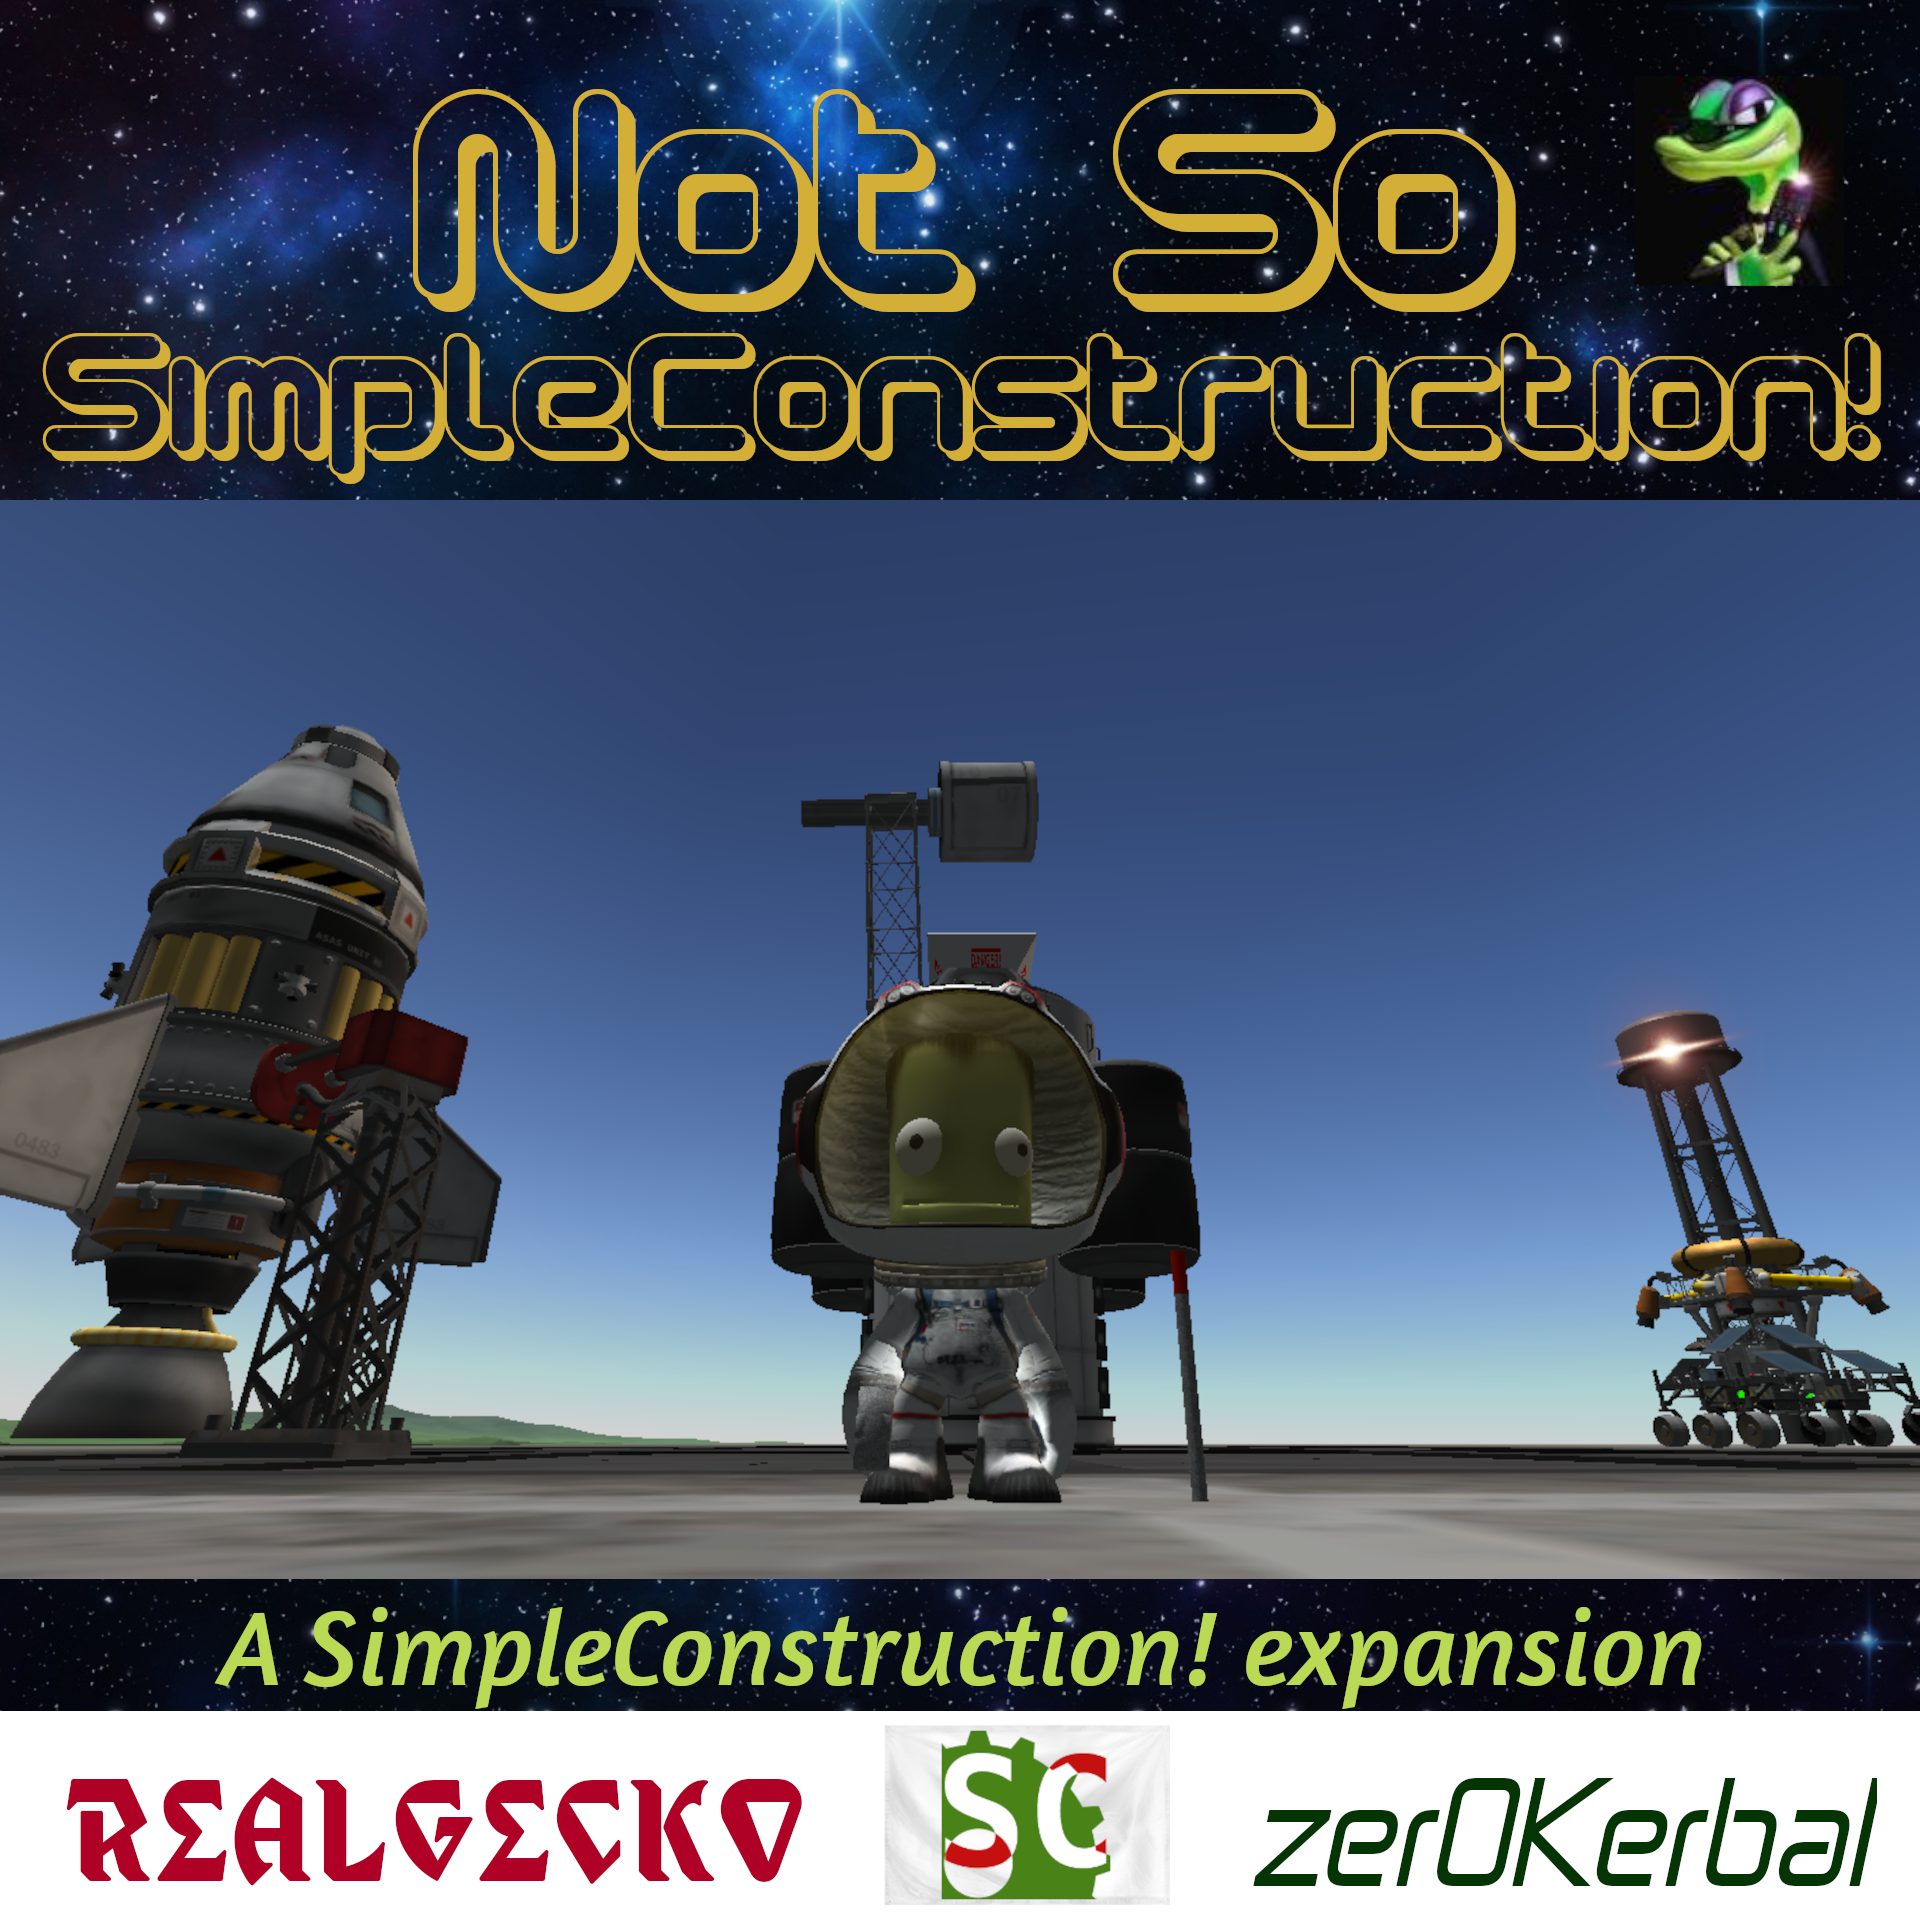 Not So SimpleConstruction! (NSSC) by RealGecko project avatar